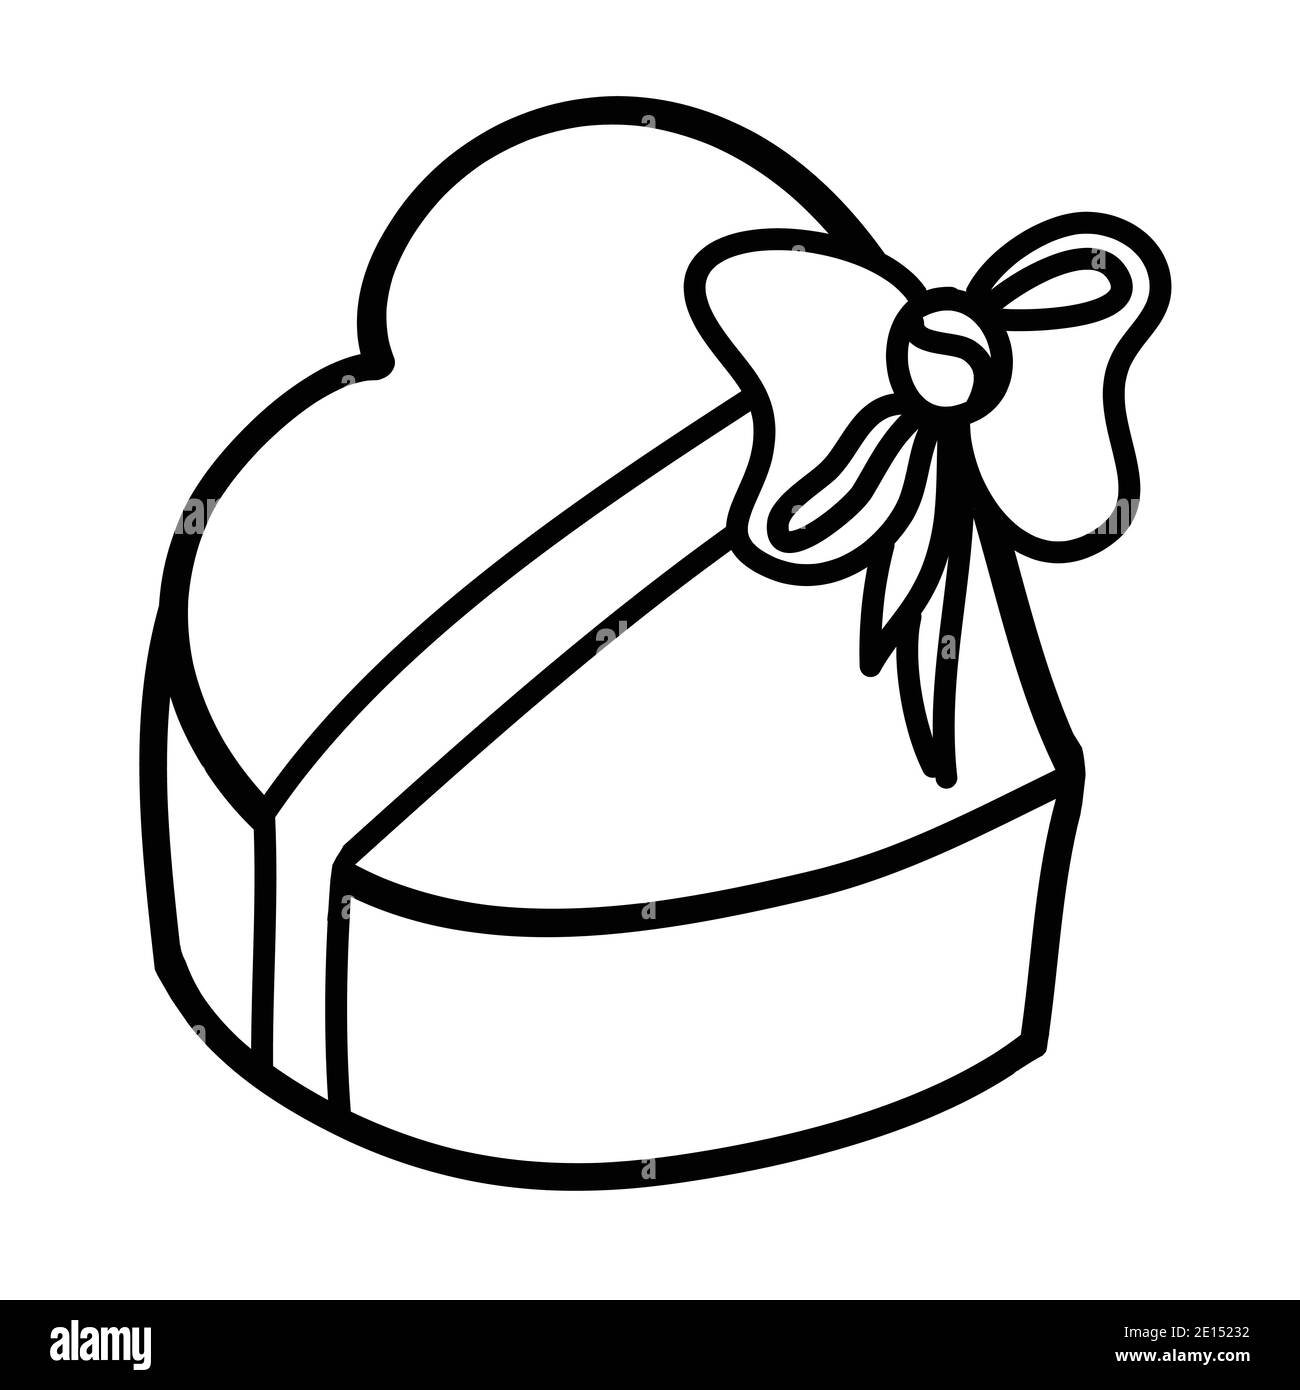 Gift box in the shape of a heart doodle style, simple line